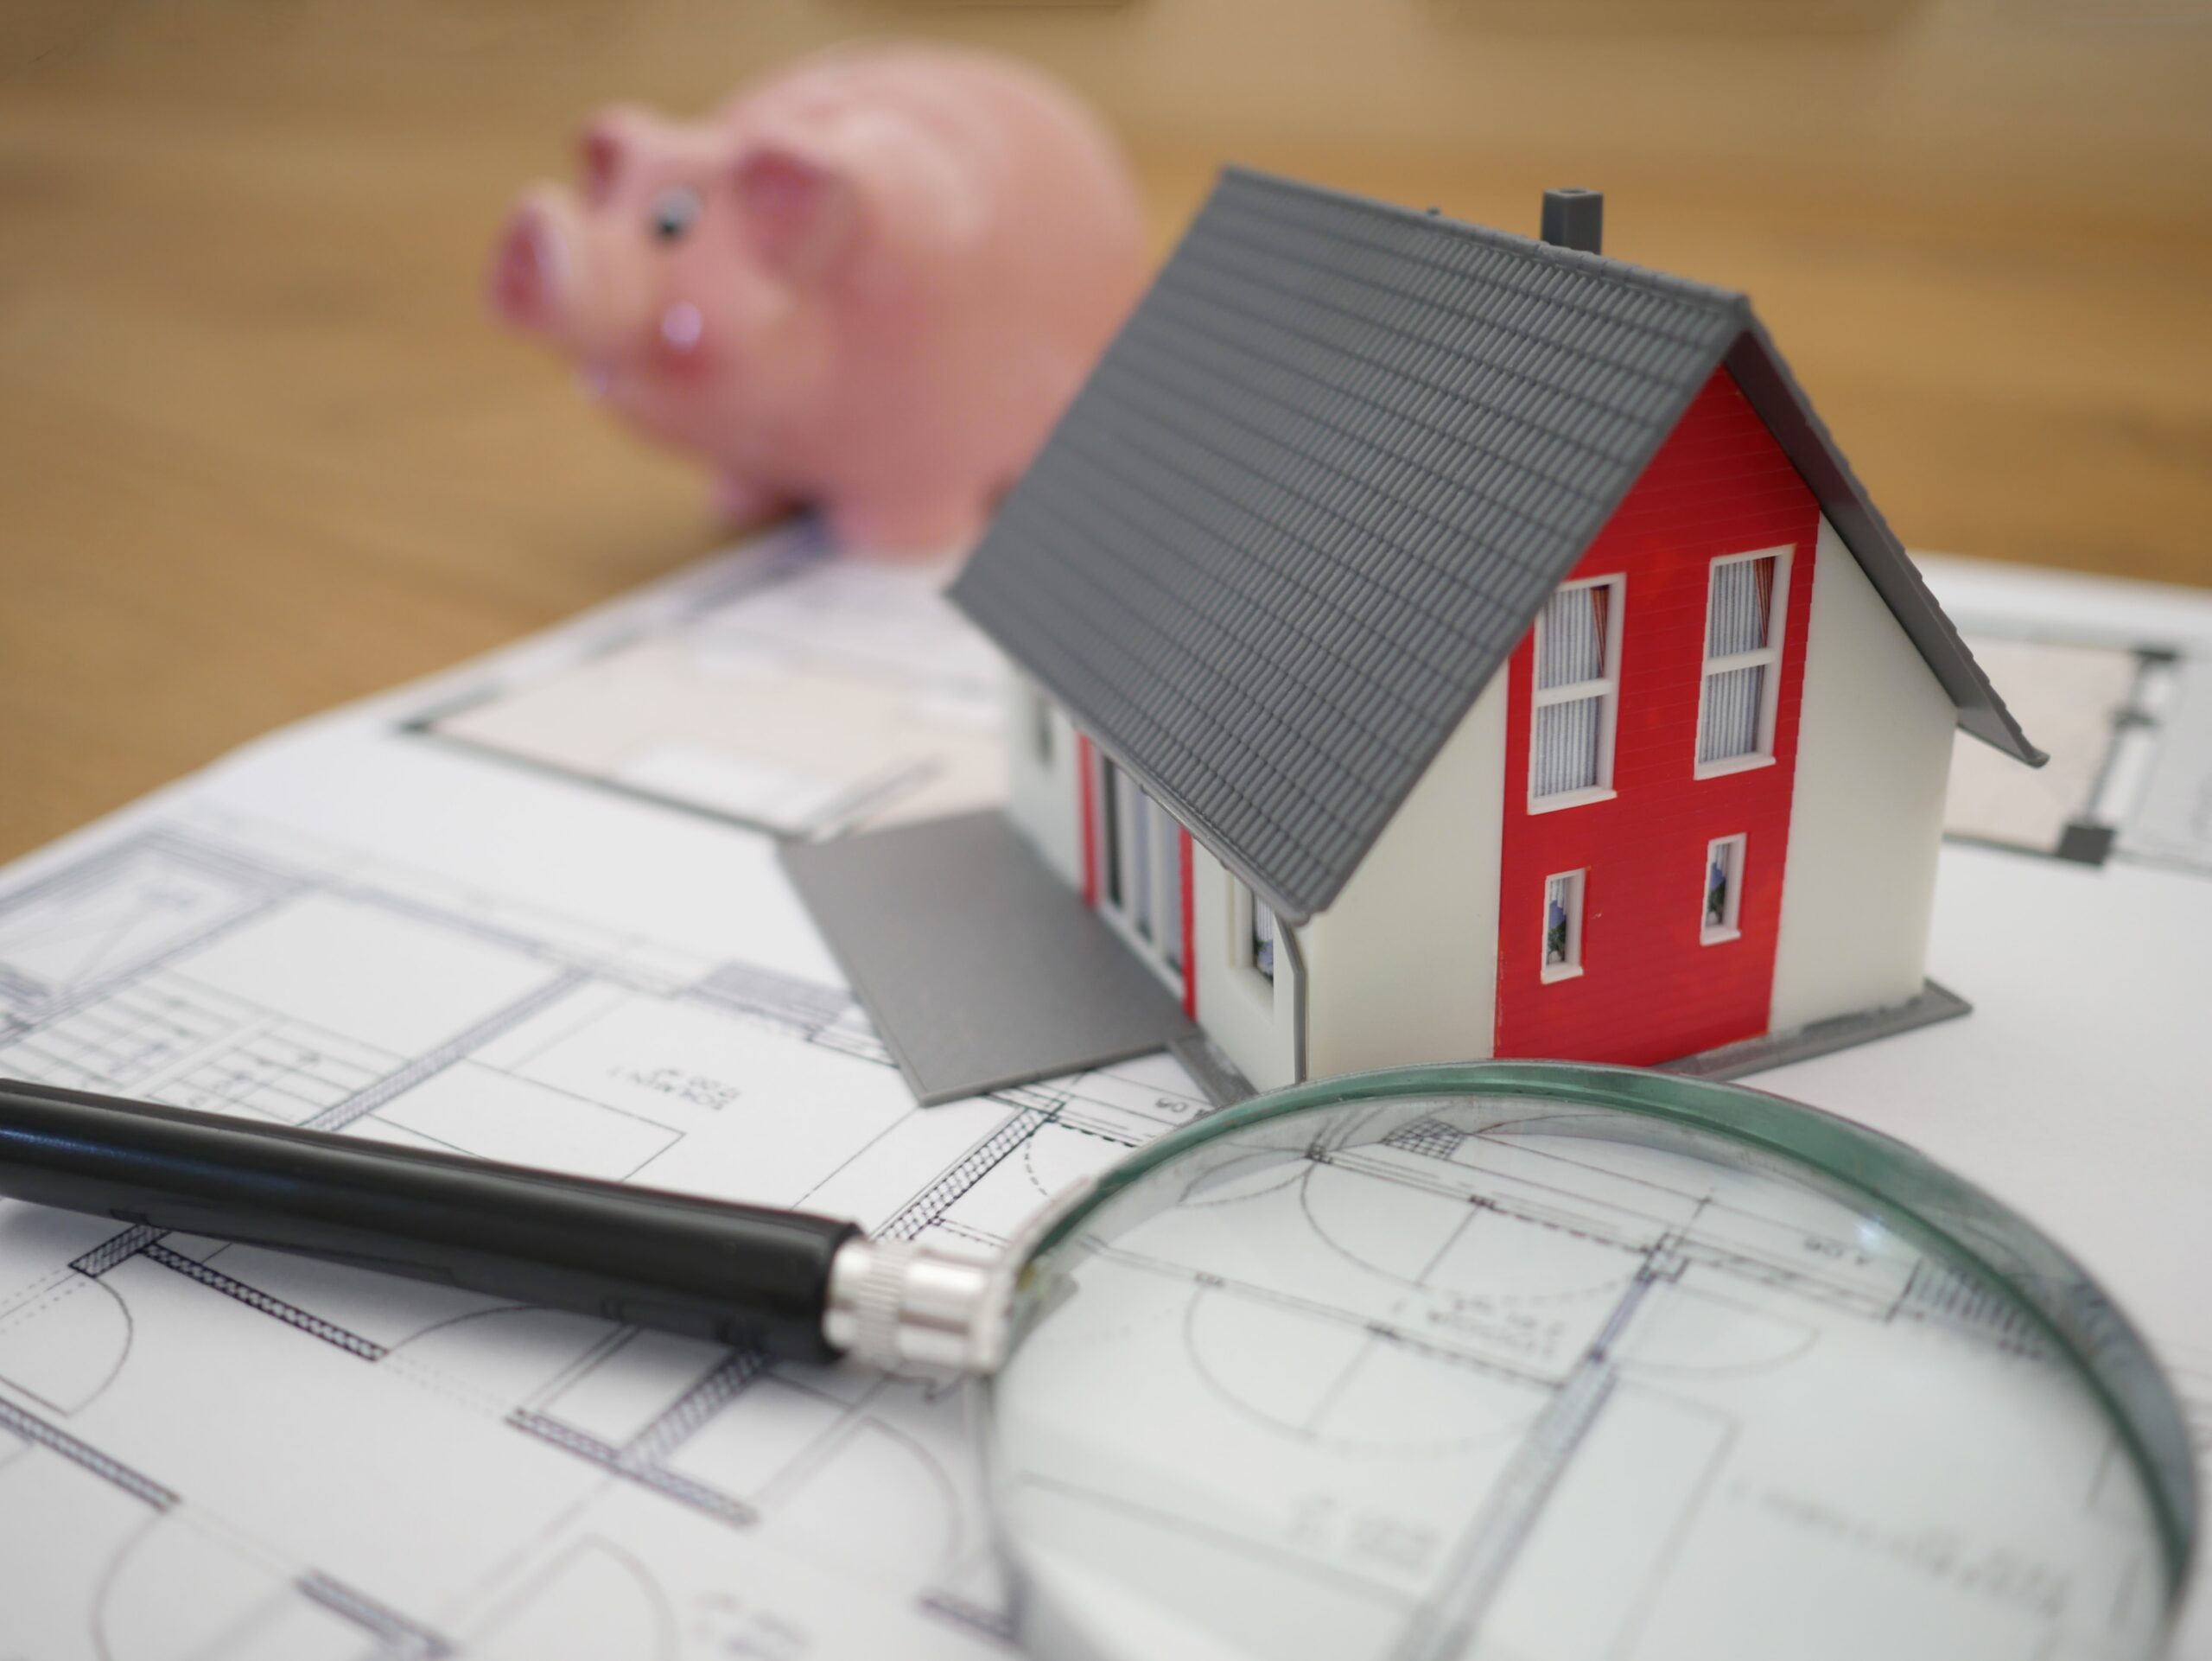 Stock image: Piggy bank, model house and magnifying glass laying on building plans